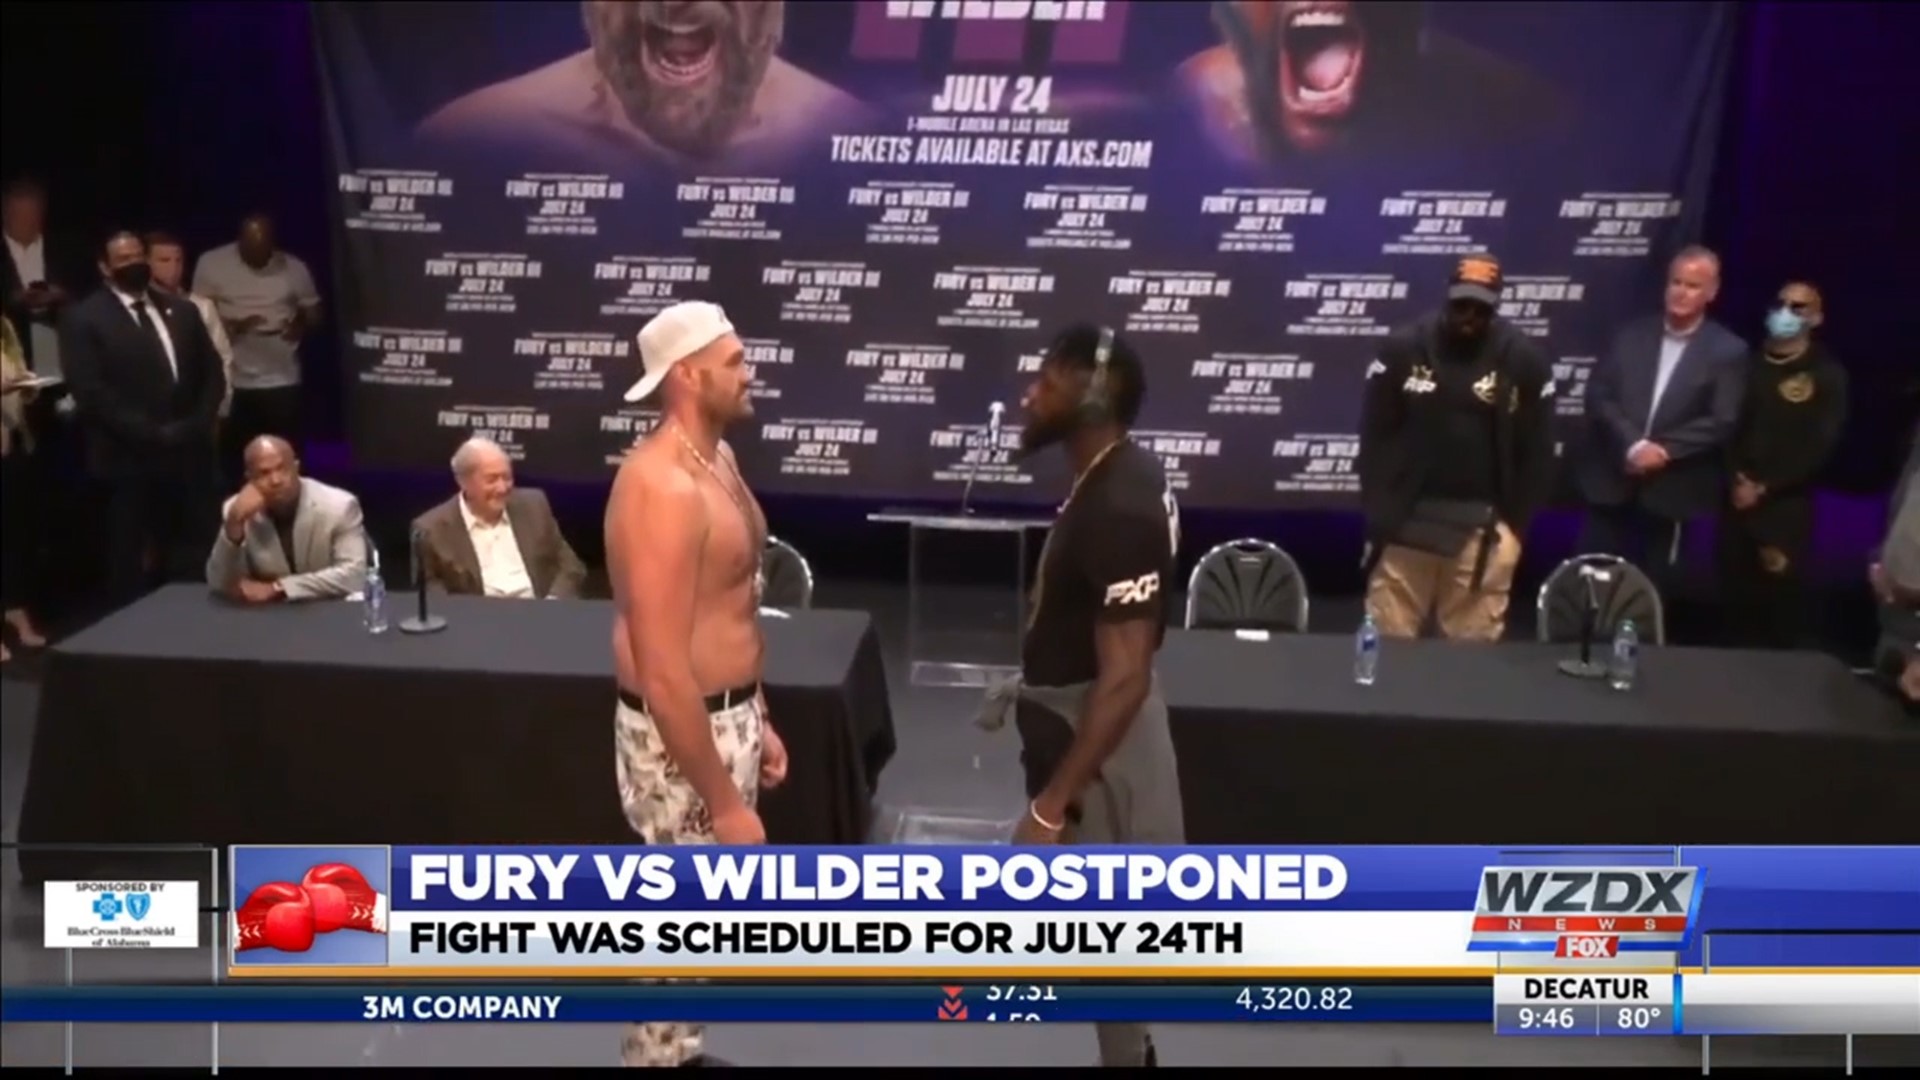 Tyson Fury has tested positive for COVID-19, and his third bout with Deontay Wilder will be postponed likely until the fall.